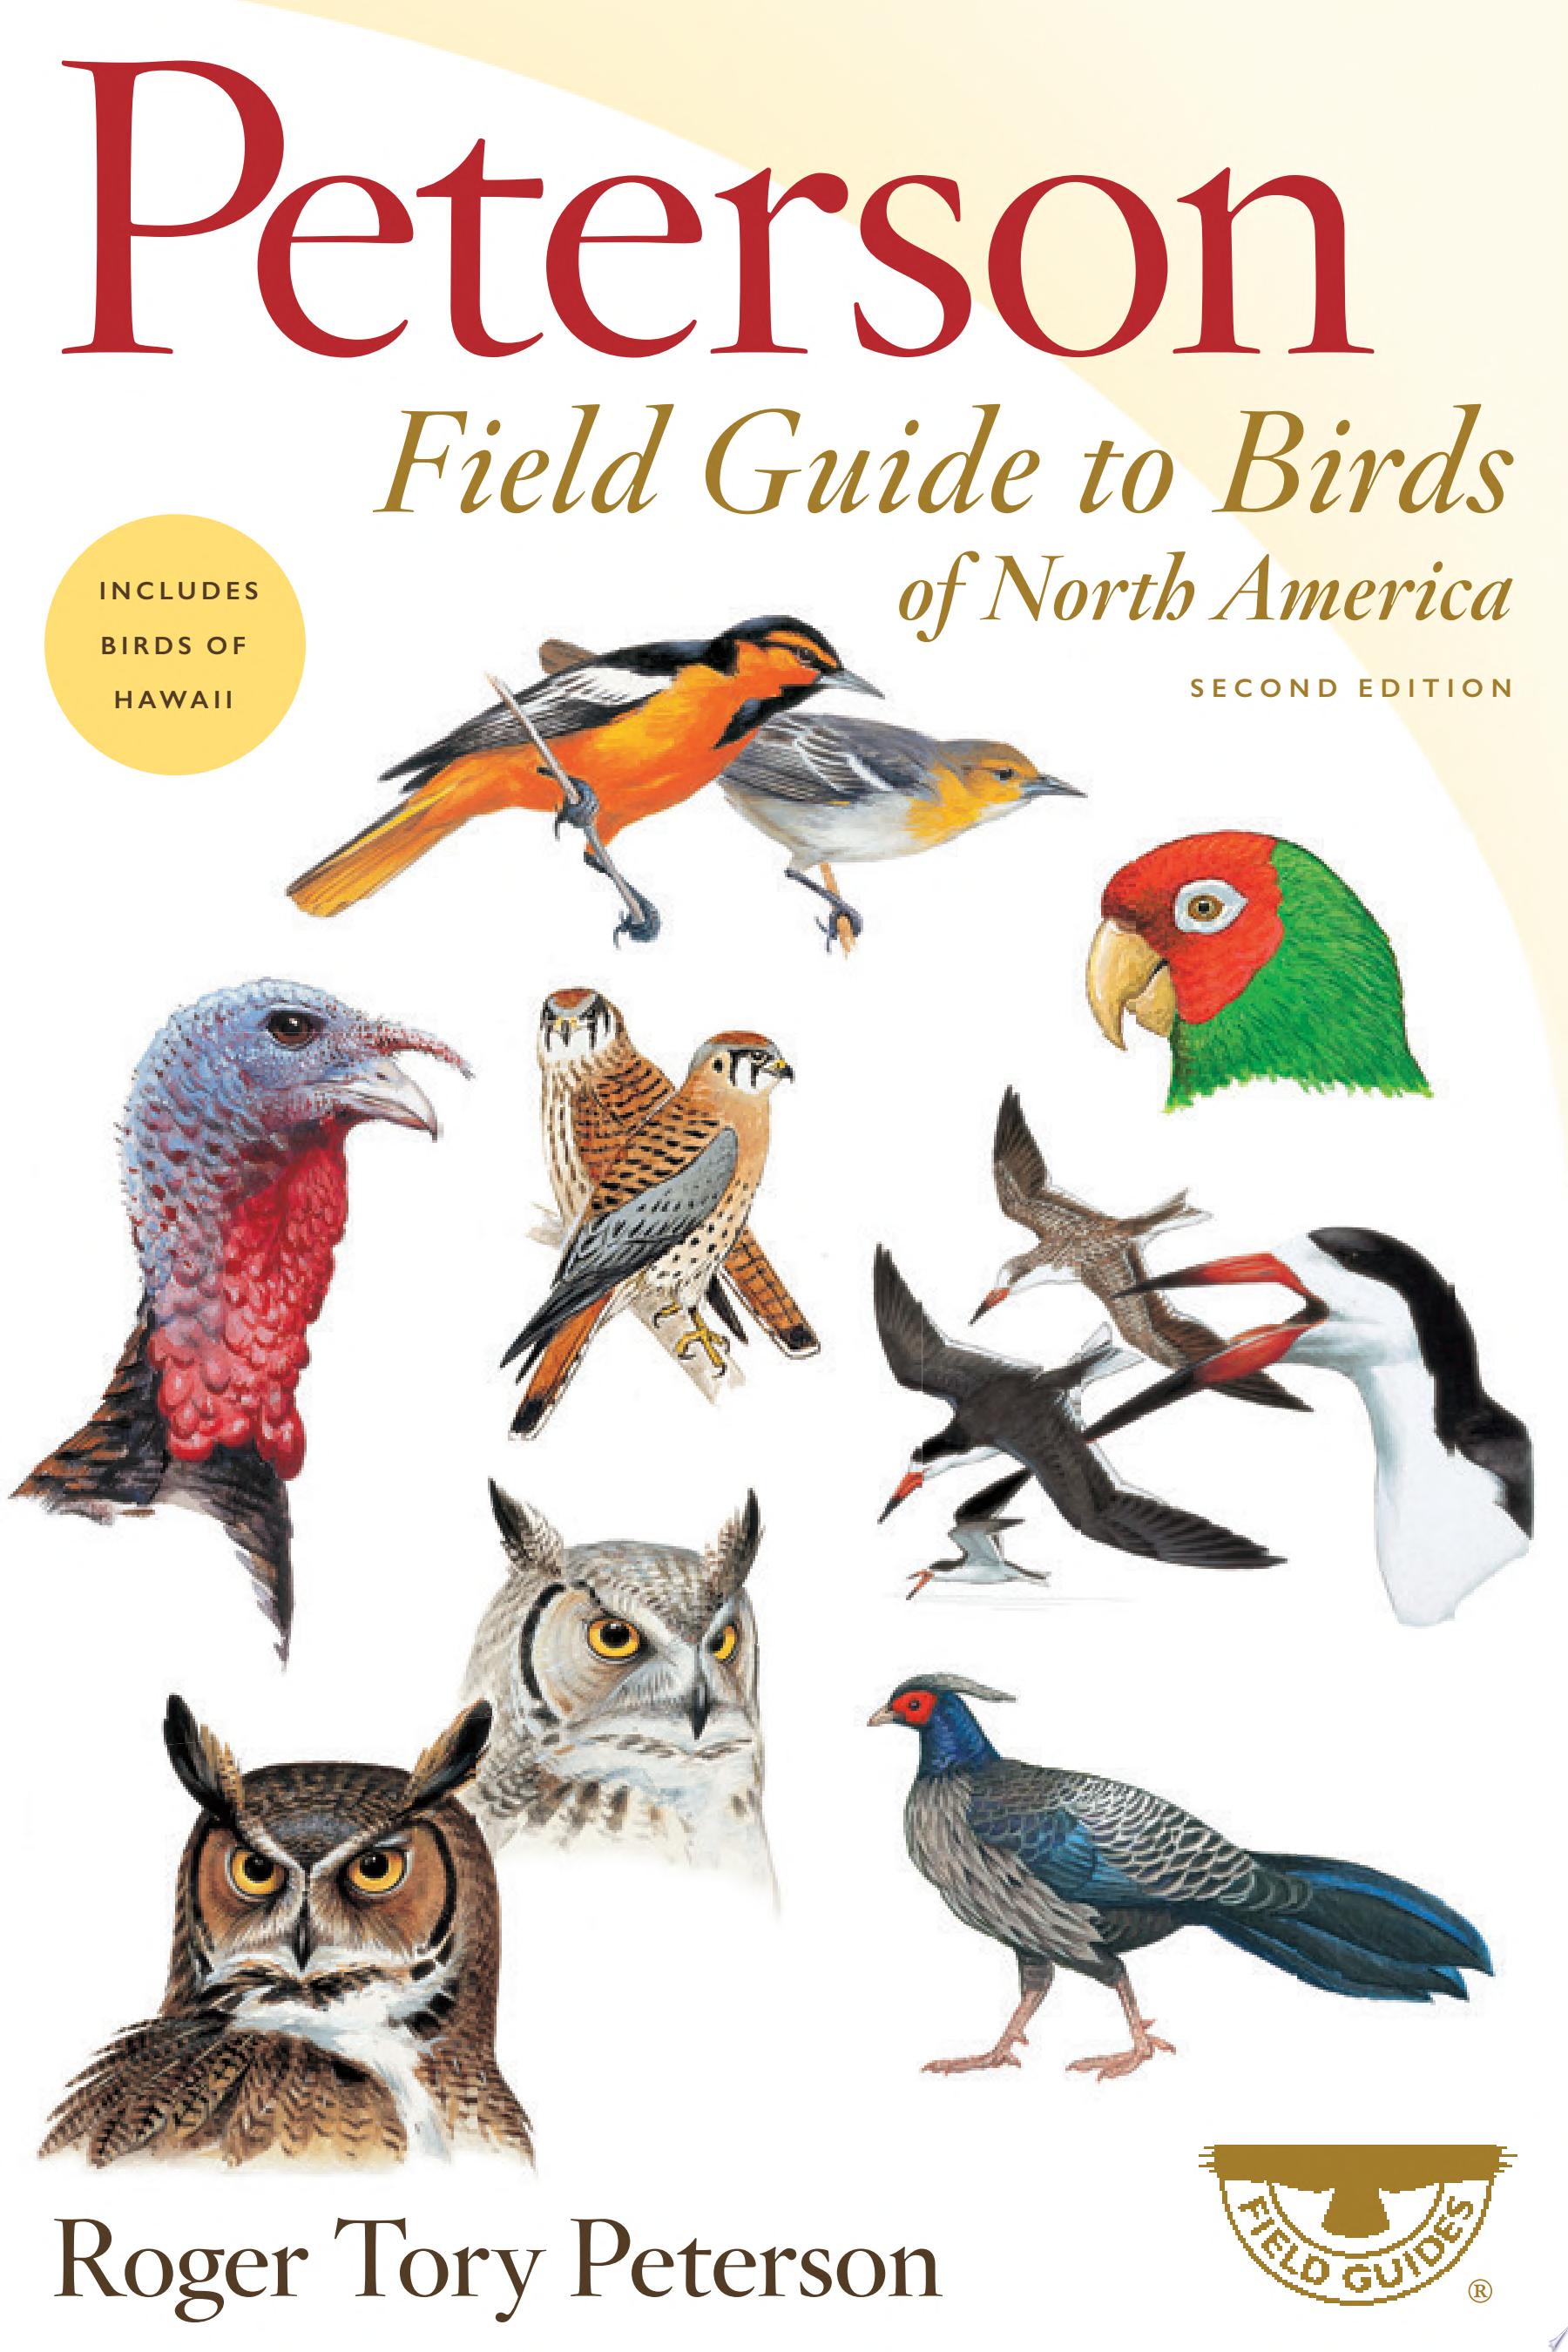 Image for "Peterson Field Guide to Birds of North America"